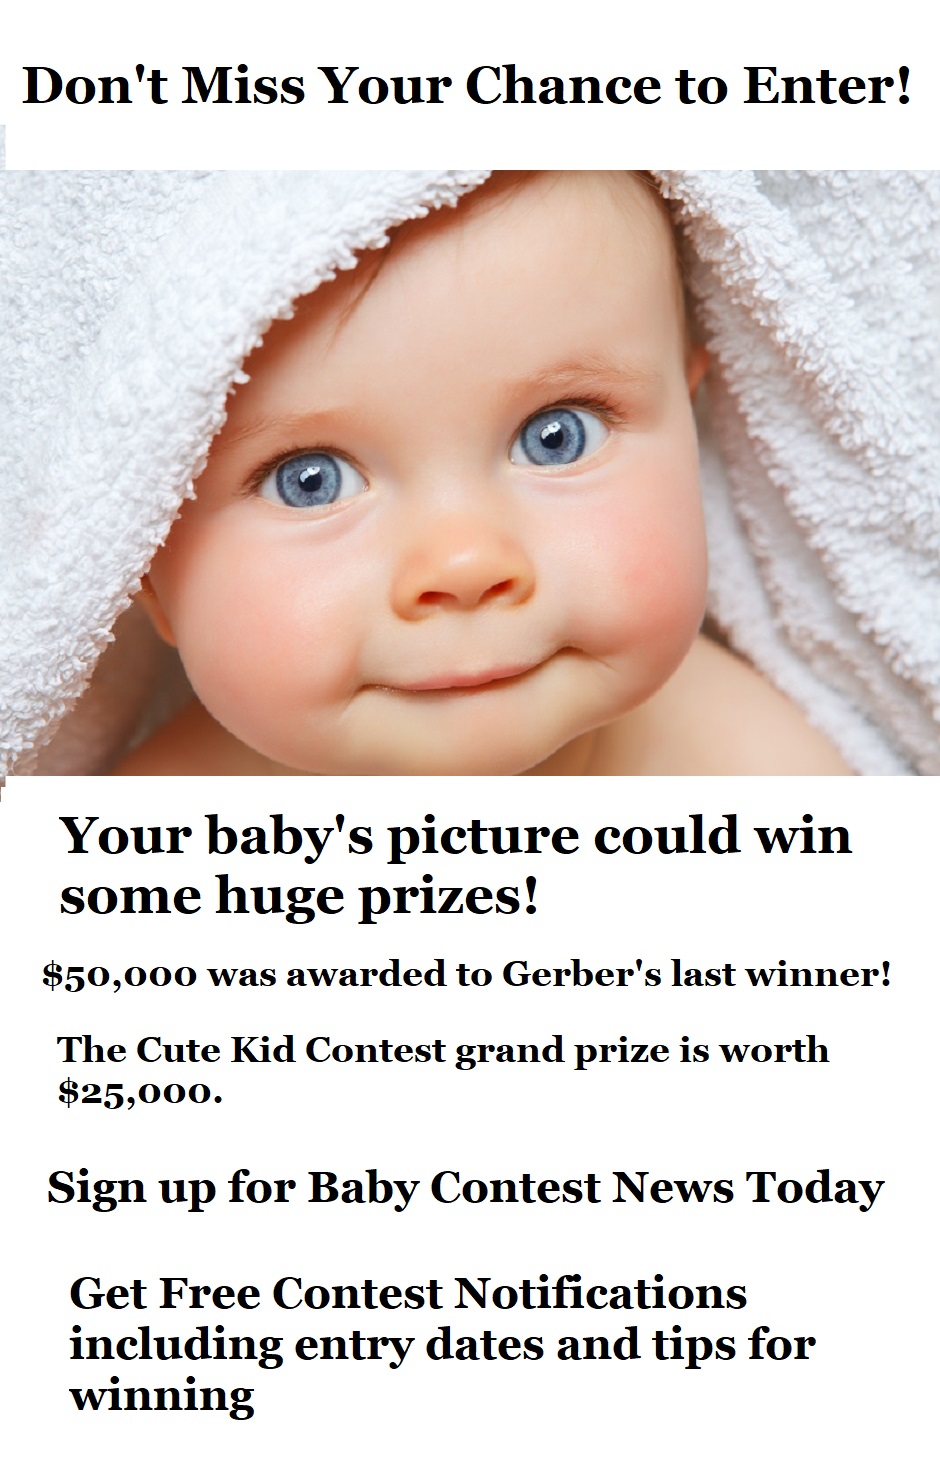 gerber photo search 2018